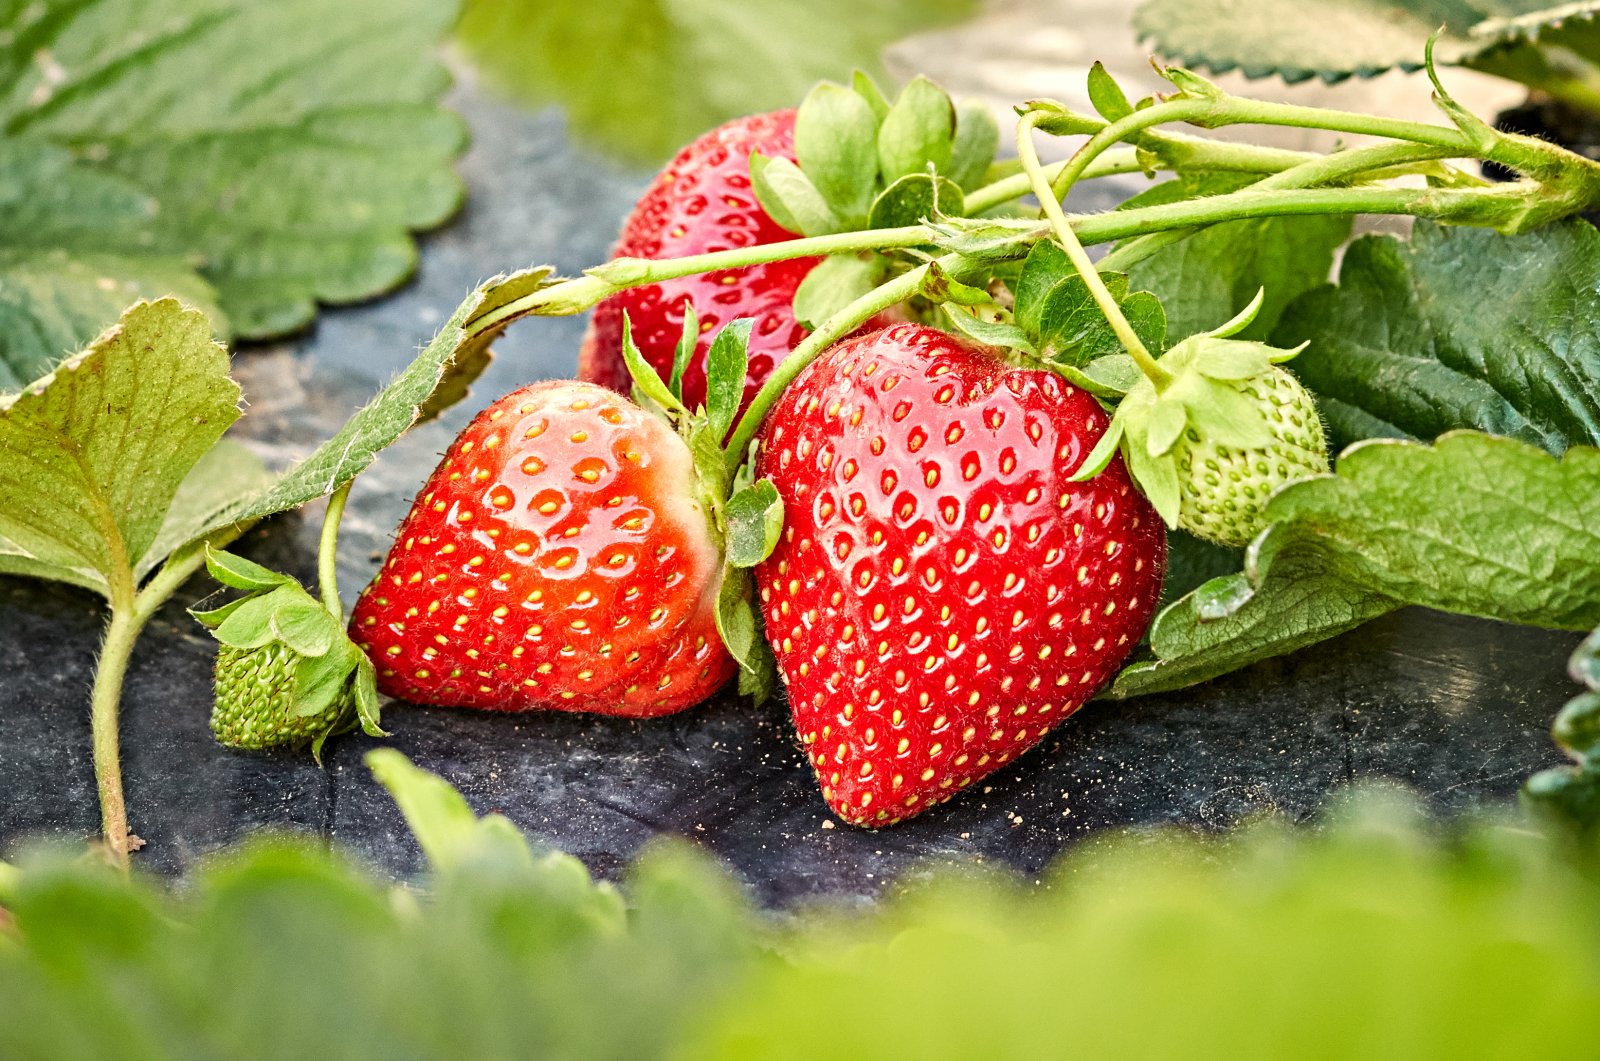 Bugs and worms can live in your strawberries, though it is rare. (iStock Photo)
